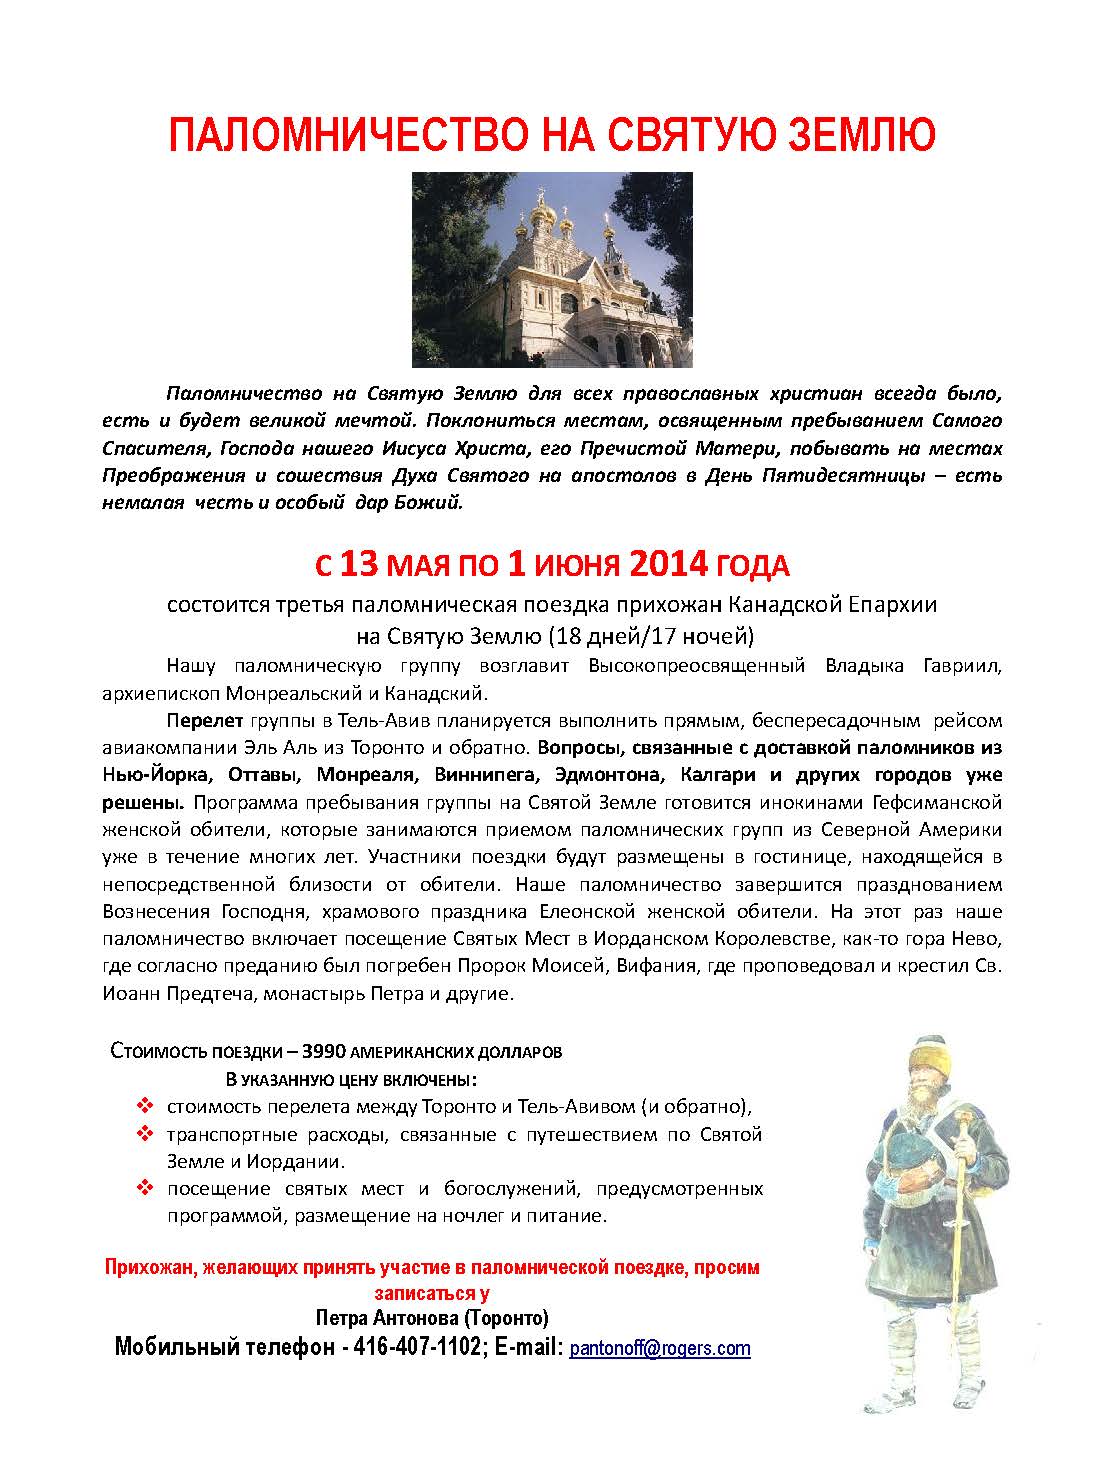 Pilgrimage-announcement-2014_-rus_updated_Page_1